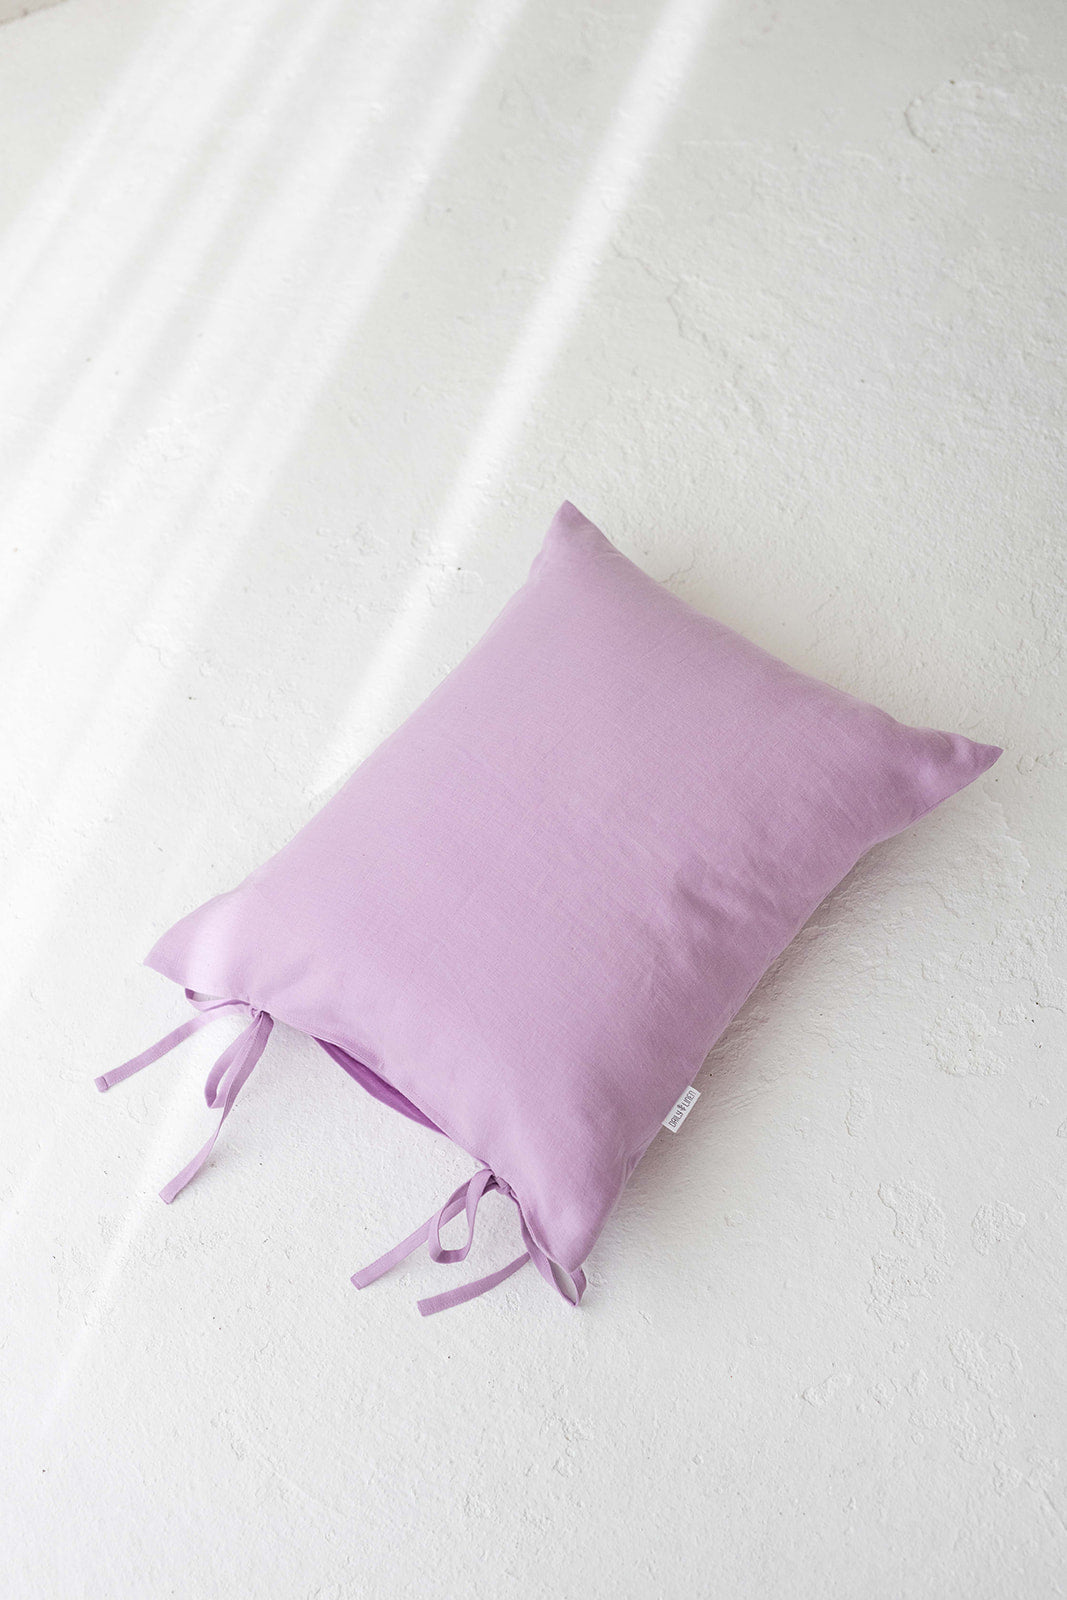 Linen Pillowcase With Ties In Lavender Color - Daily Linen